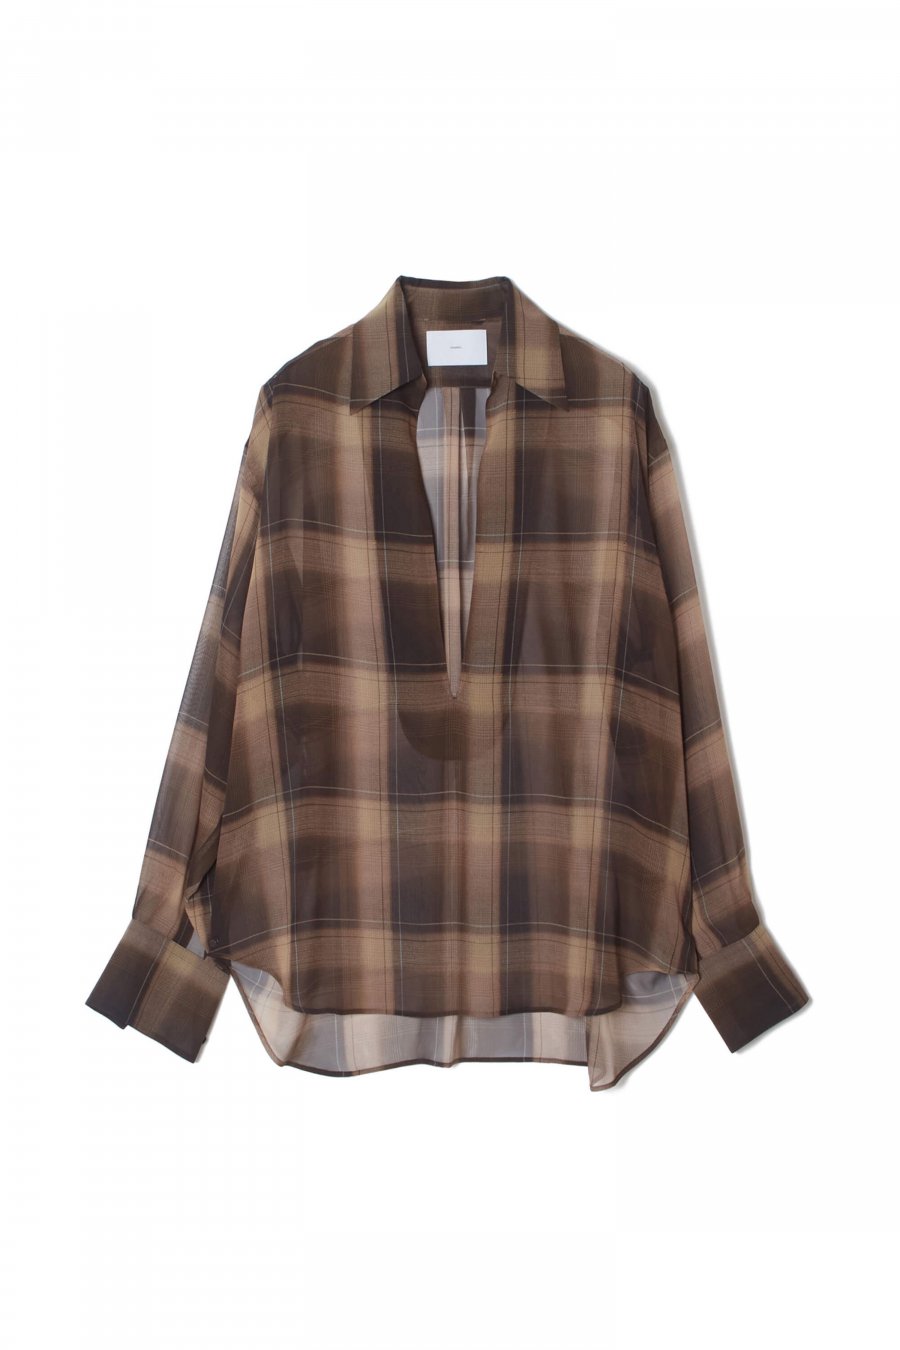 SUGARHILL  SHEER OMBRE BLOUSE(BROWN CAMEL)<img class='new_mark_img2' src='https://img.shop-pro.jp/img/new/icons15.gif' style='border:none;display:inline;margin:0px;padding:0px;width:auto;' />